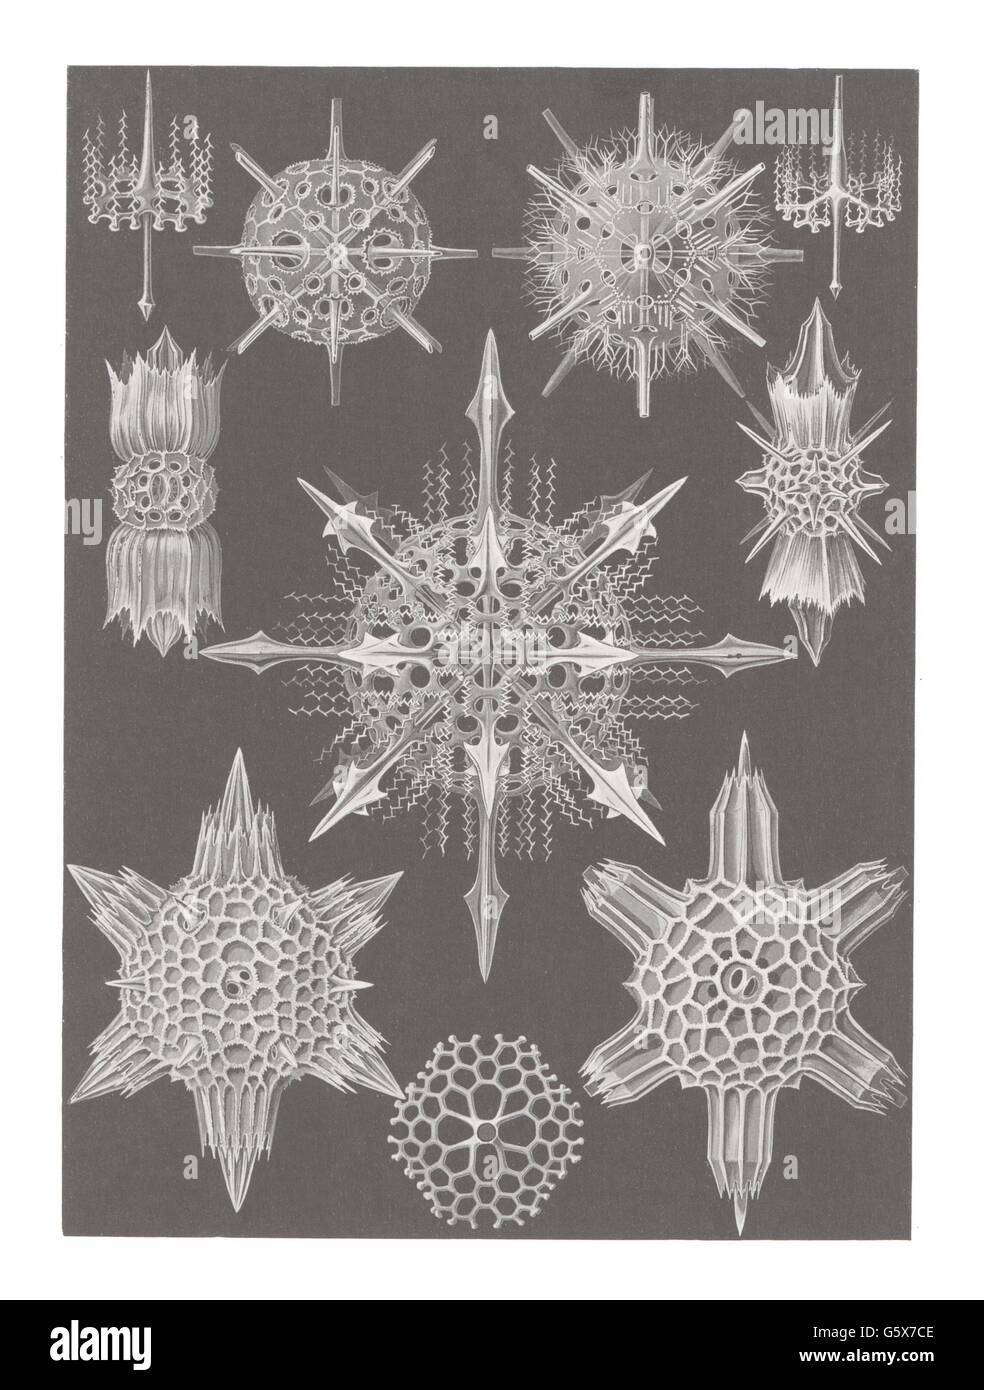 zoologie / Tiere, Akantharia, Farblithographie, aus: Ernst Haeckel, 'Kunstformen der Natur', Leipzig - Wien, 1899 - 1904, Additional-Rights-Clearences-not available Stockfoto